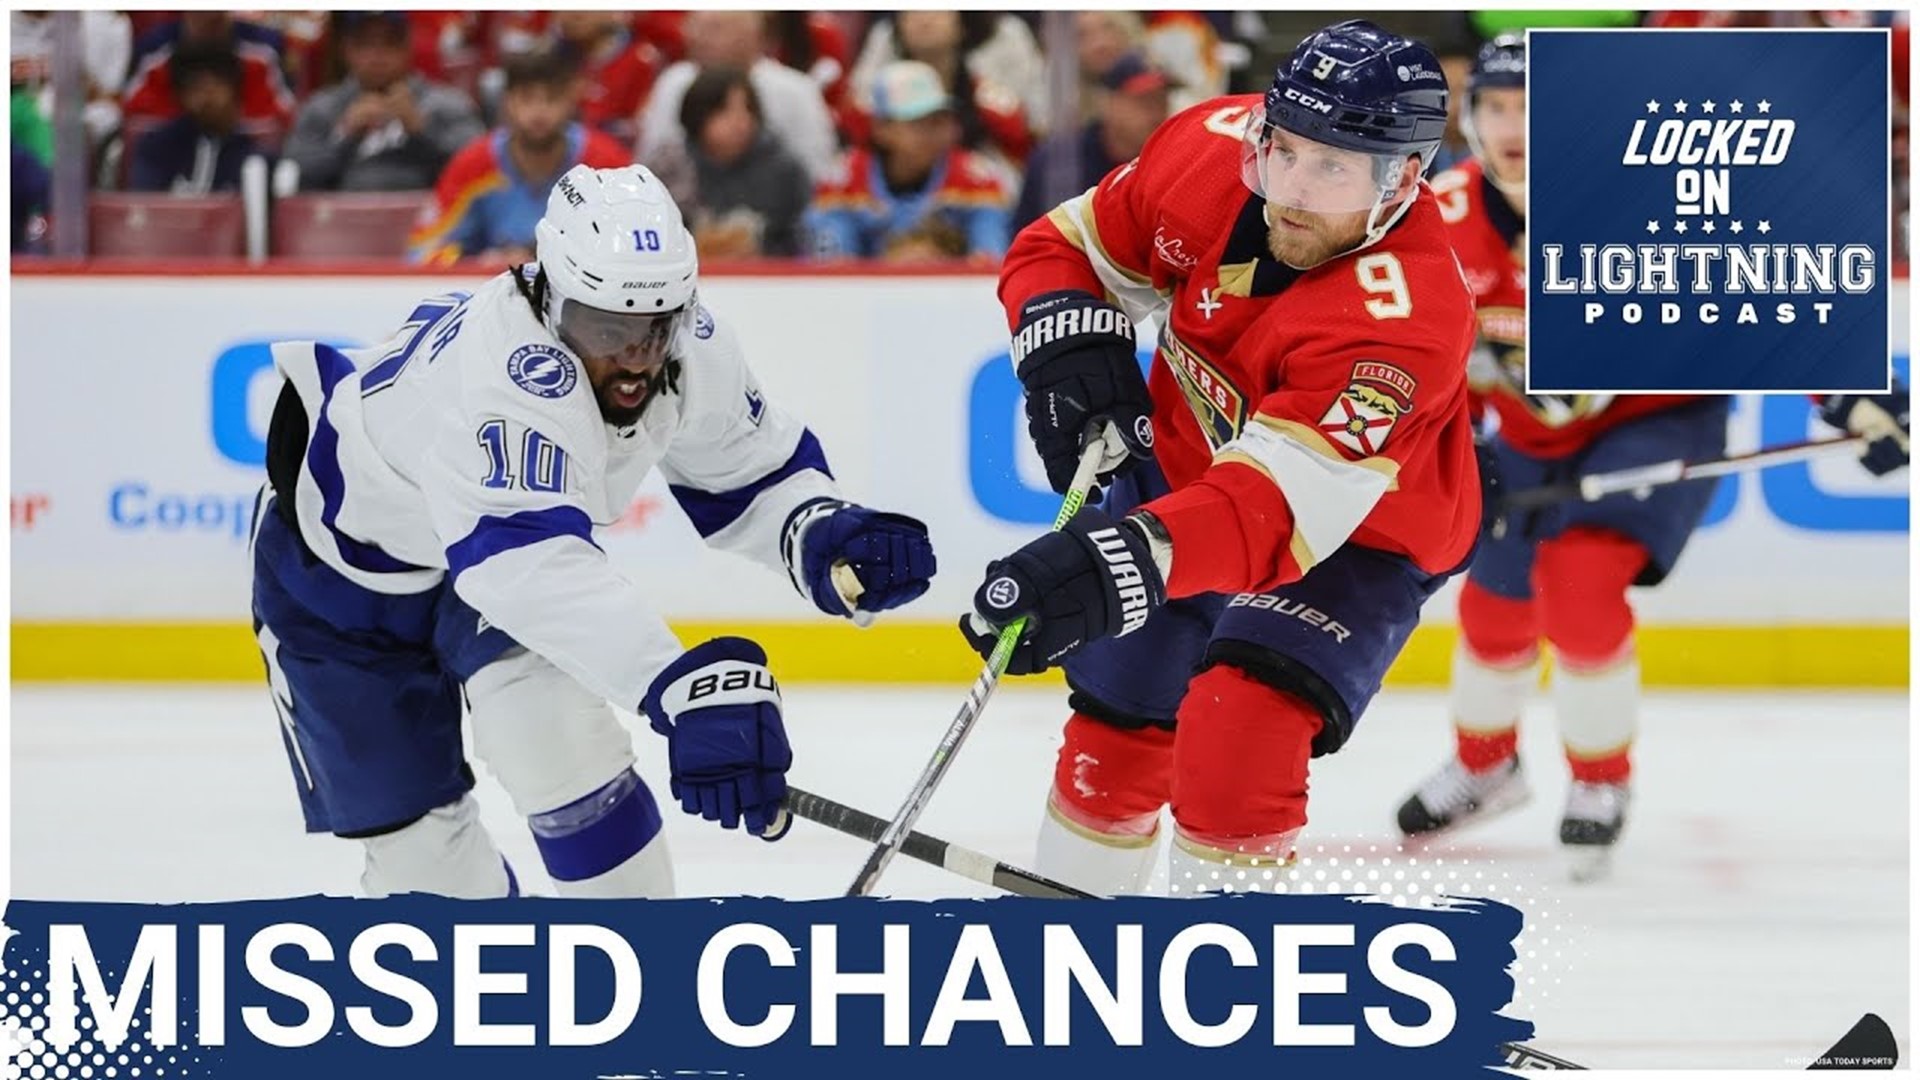 The Lightning failed to put up a shot on goal in the first 15 minutes of their Game 1 matchup with the Florida Panthers.